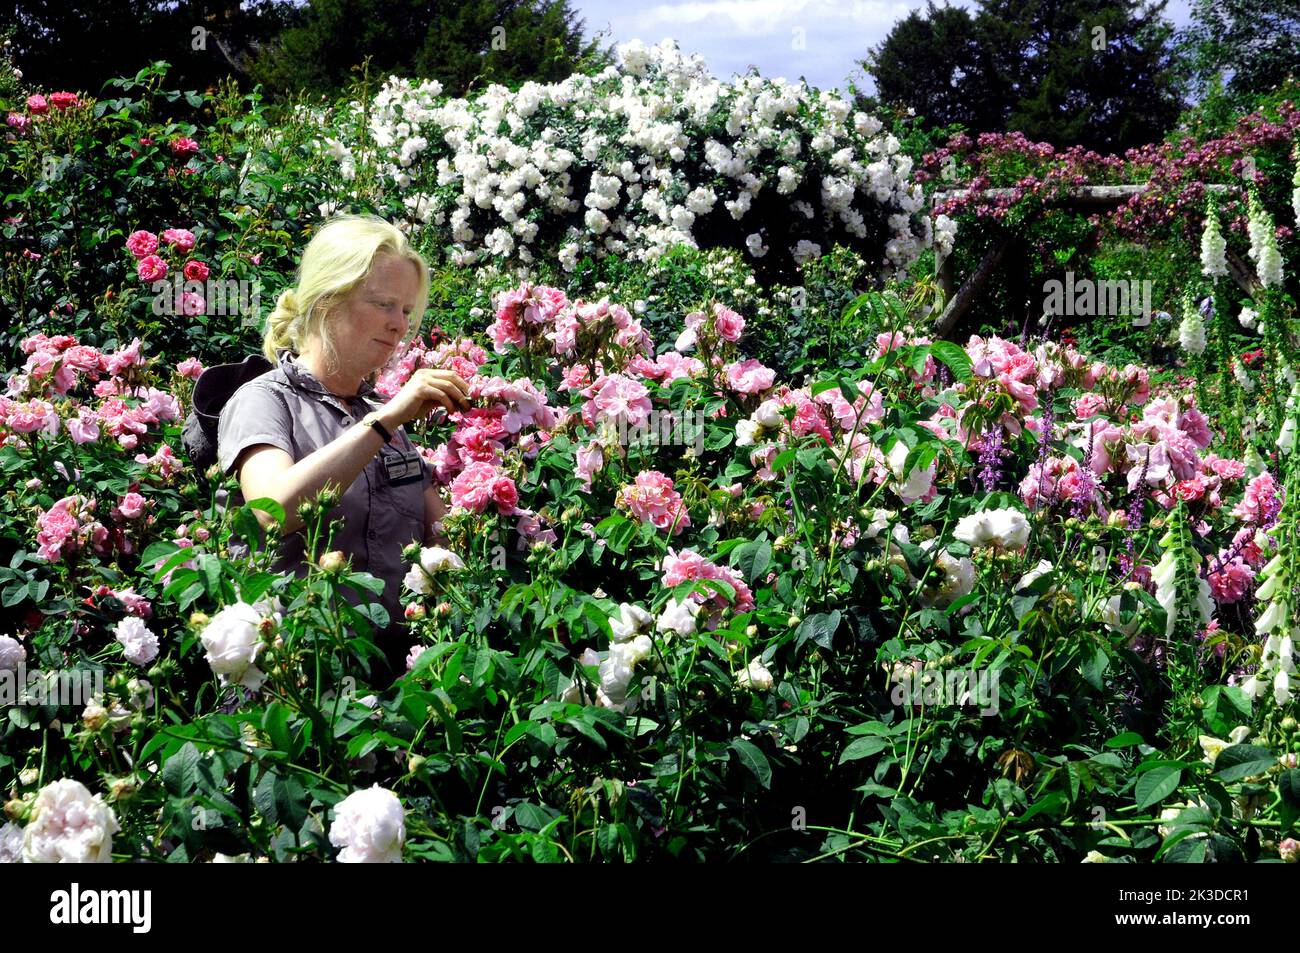 Its been a good year for the roses. The walled rose garden at the National Trust's Mottisfont Abbey near Romsey, |Hampshireis a blaze of colour during a bumper season ffor rose growers.. National Trust gardener Victoria Estcourt tends the blooms visited by hundreds of garden lovers making the most of the June sunshine. Pic Mike Walker, Mike Walker Pictures,2015 Stock Photo